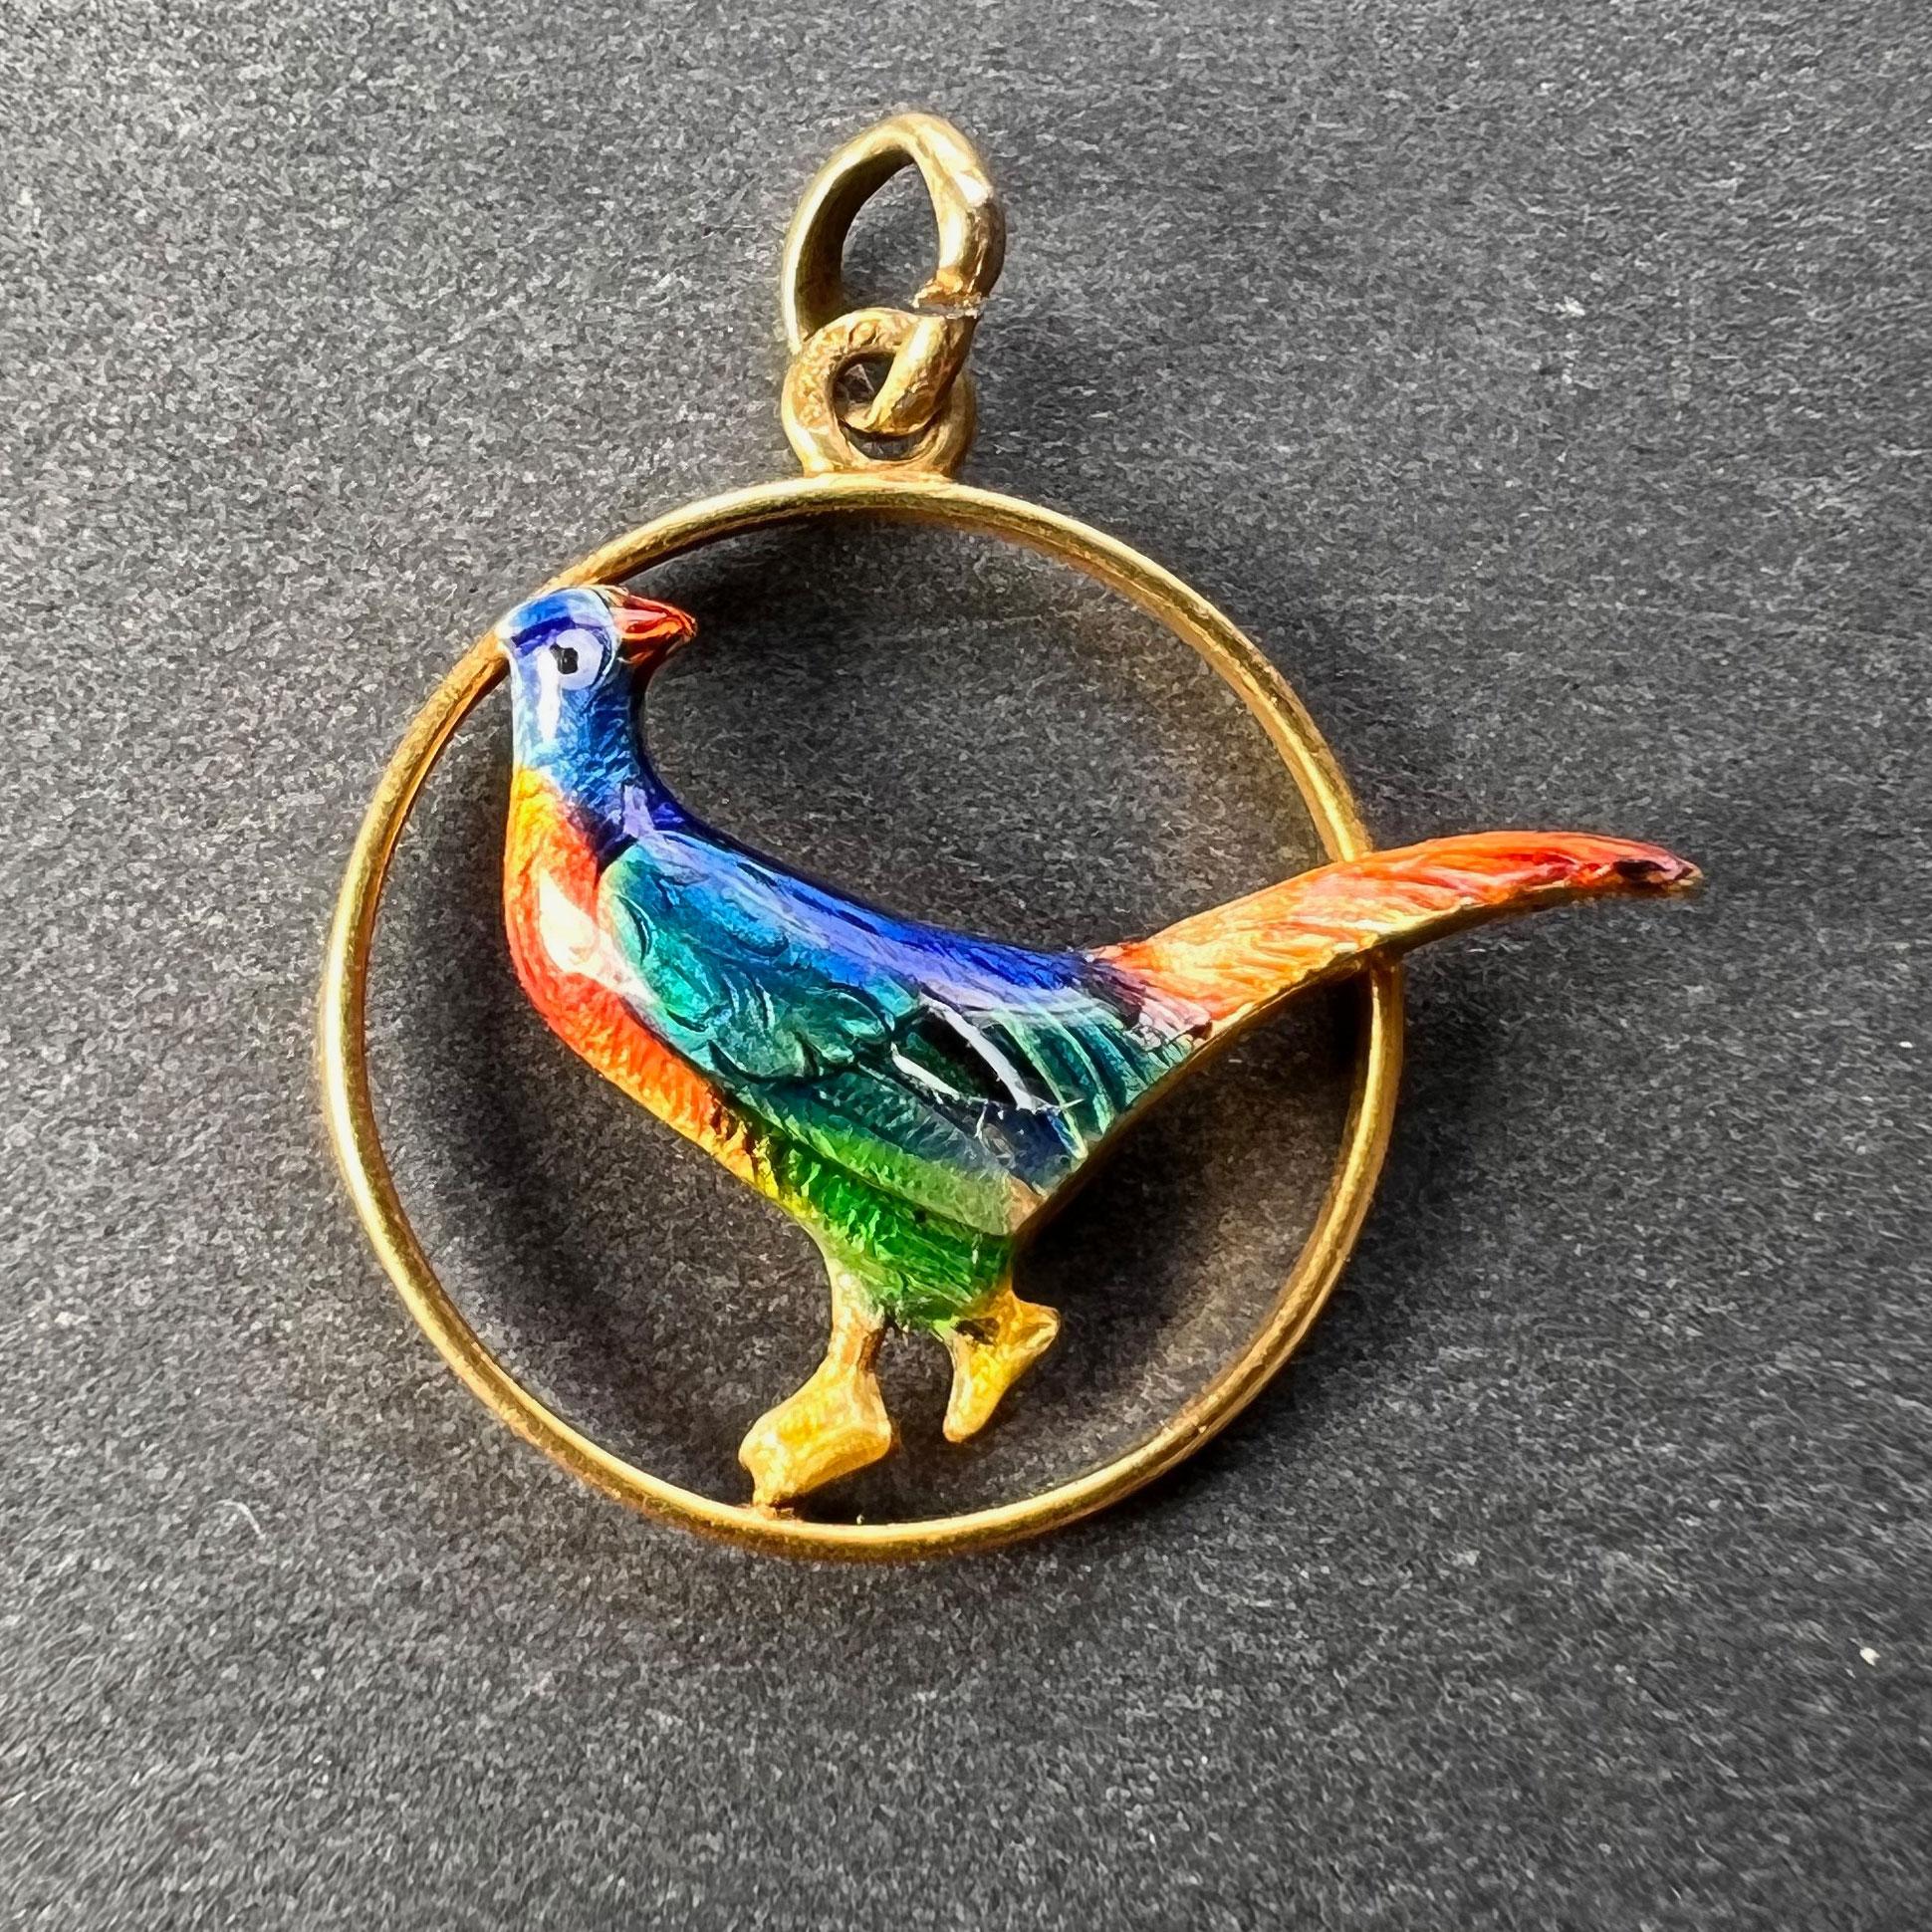 A 14 karat (14K) yellow gold charm pendant designed as a gold circle containing an enamel pheasant. Stamped 585 for 14 karat gold.

Dimensions: 1.8 x 1.9 x 0.35 cm (not including jump ring)
Weight: 0.85 grams 
(Chain not included)
